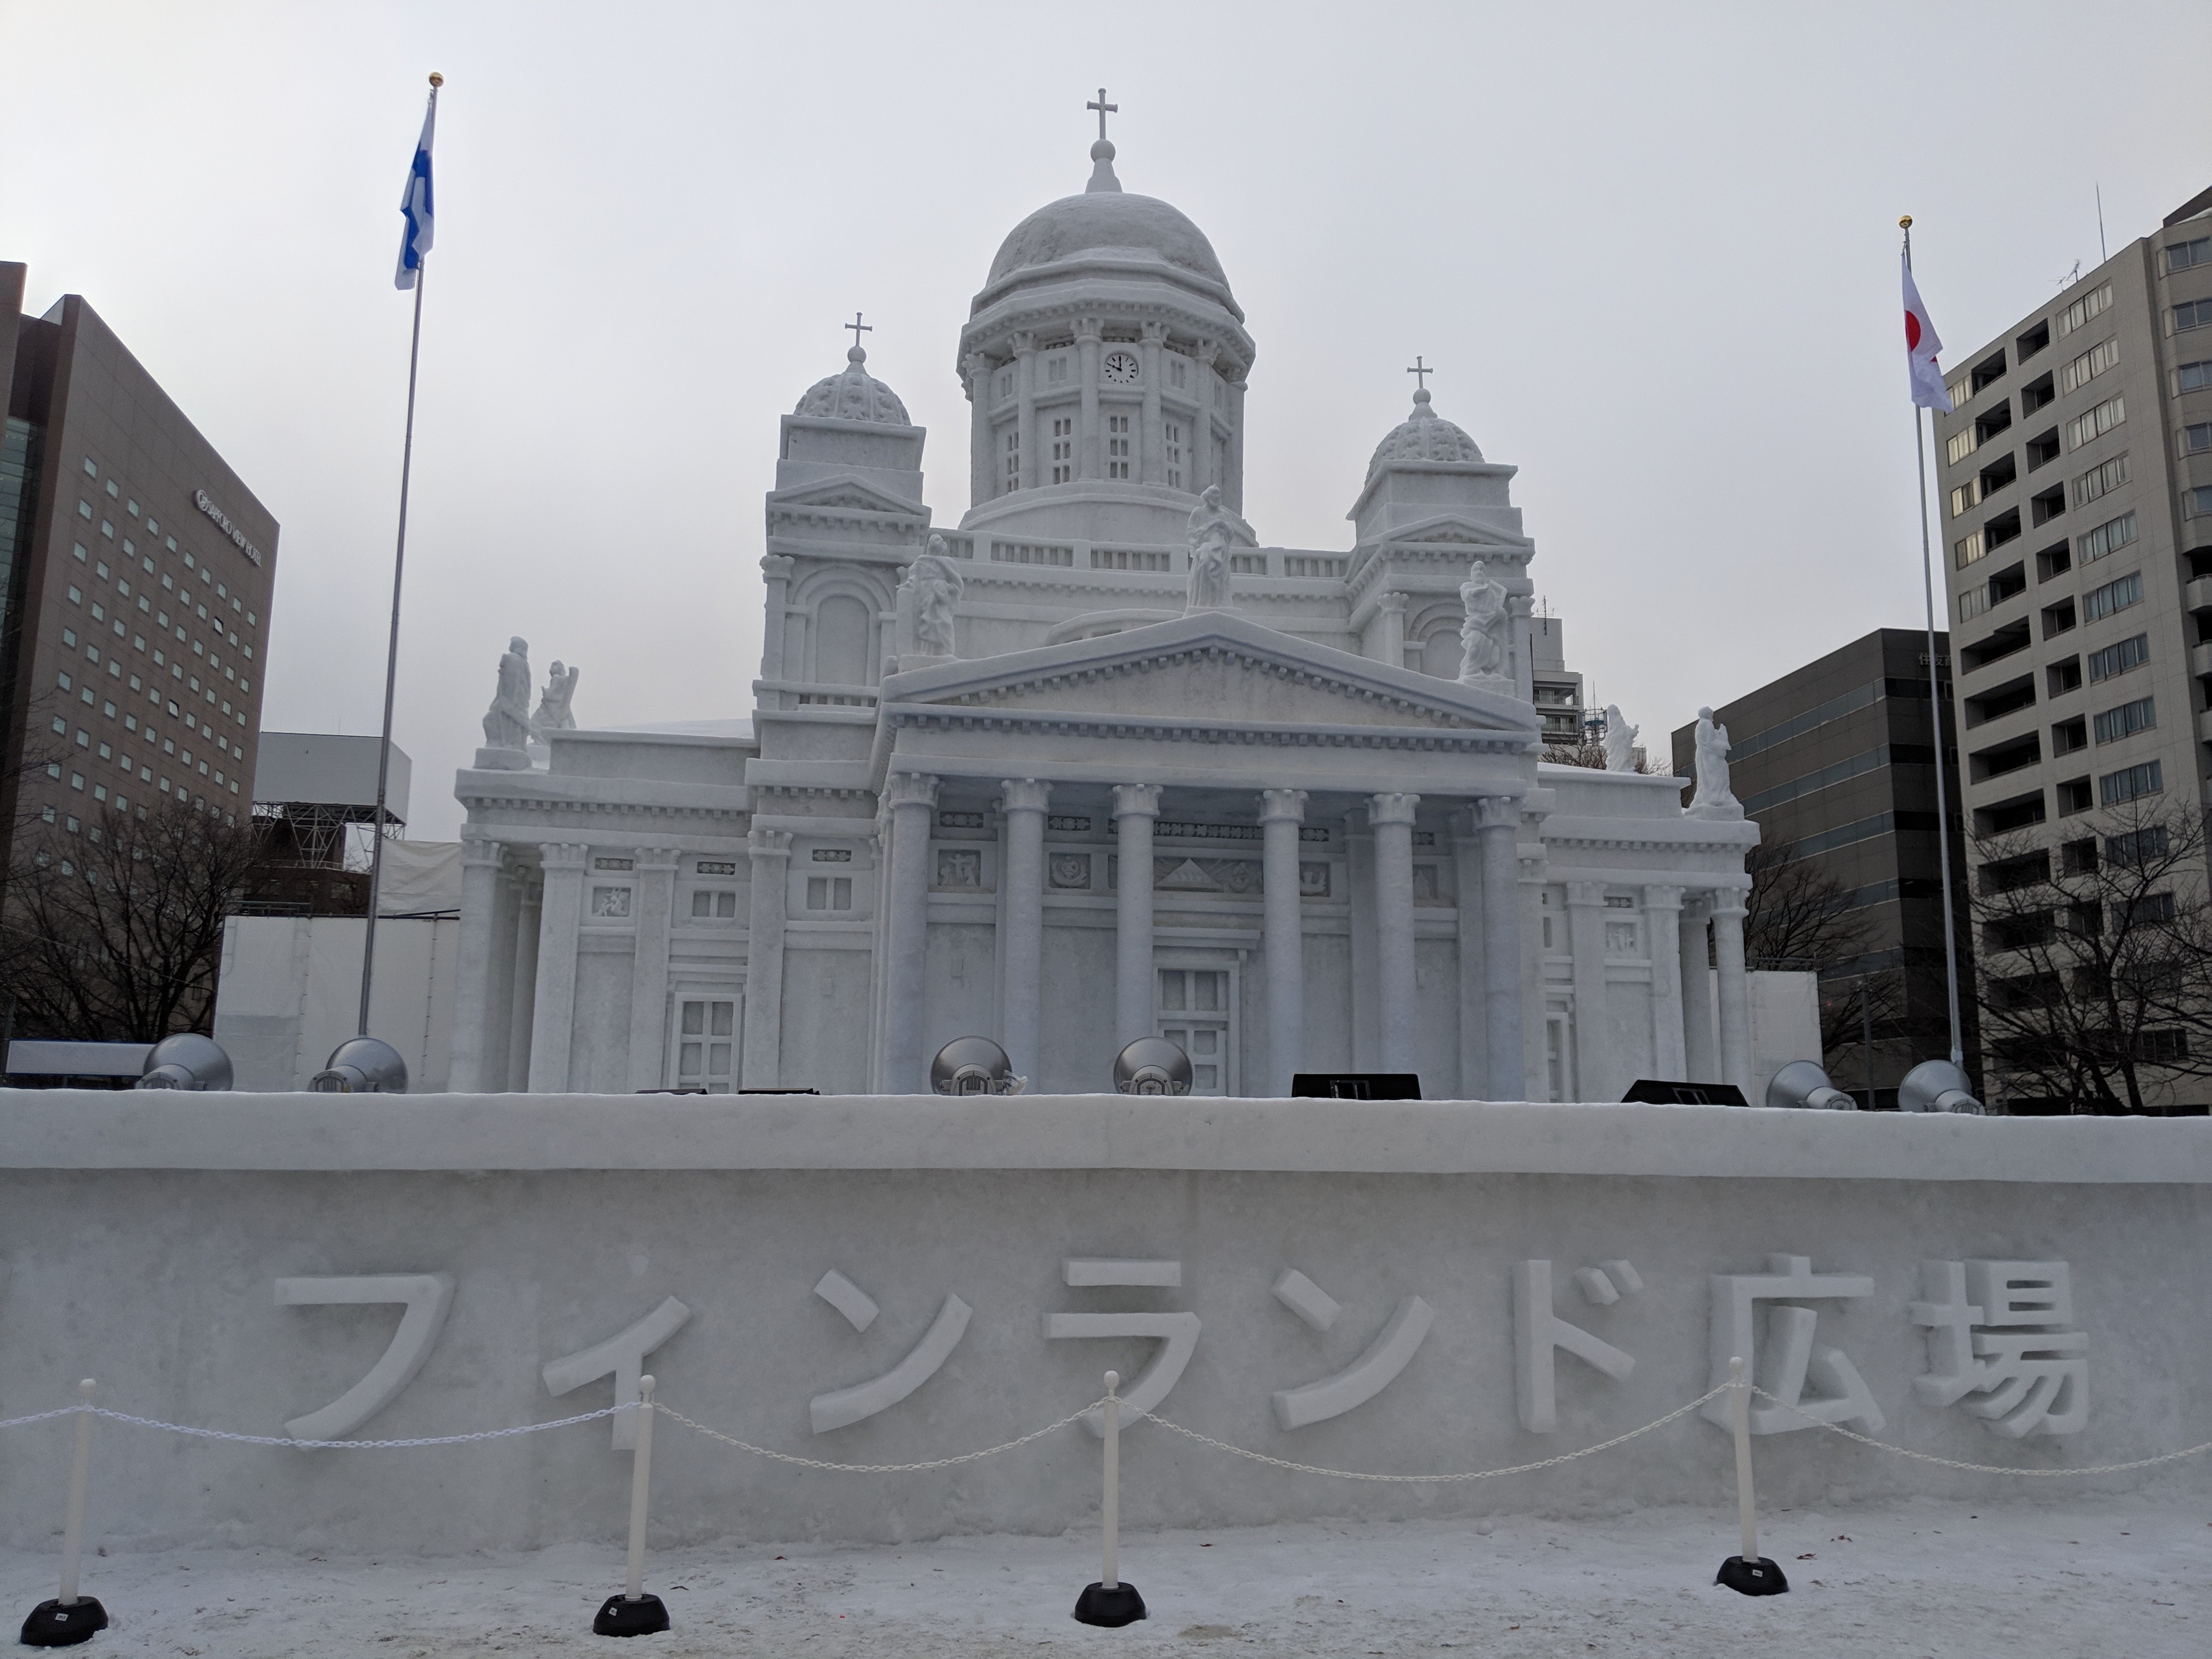 Helsinki Cathedral with incredible detail and lettering